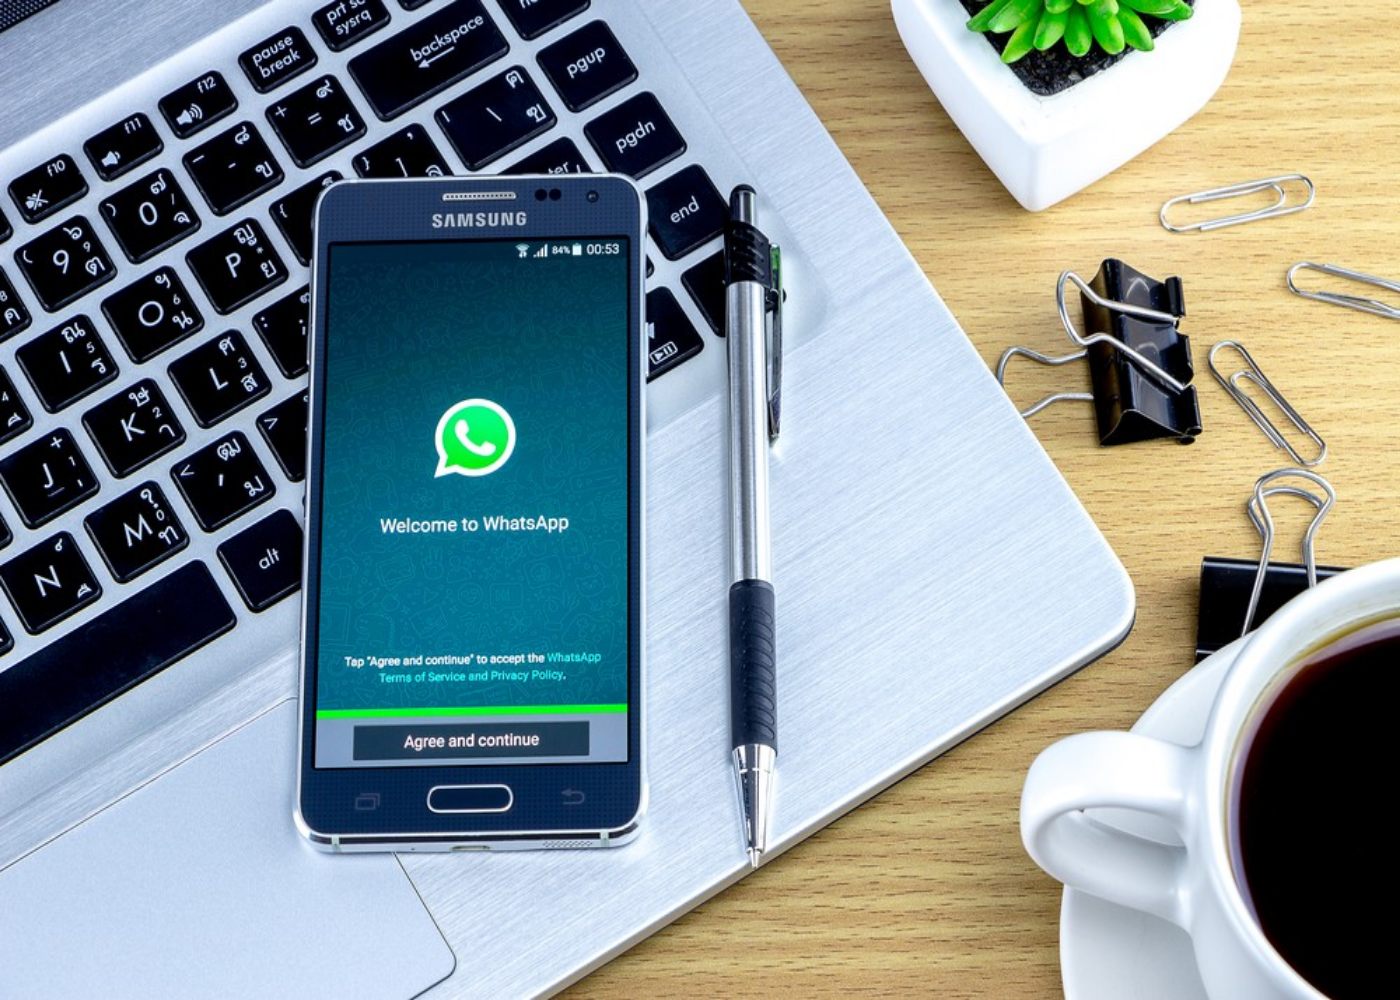 How to use WhatsApp without a SIM